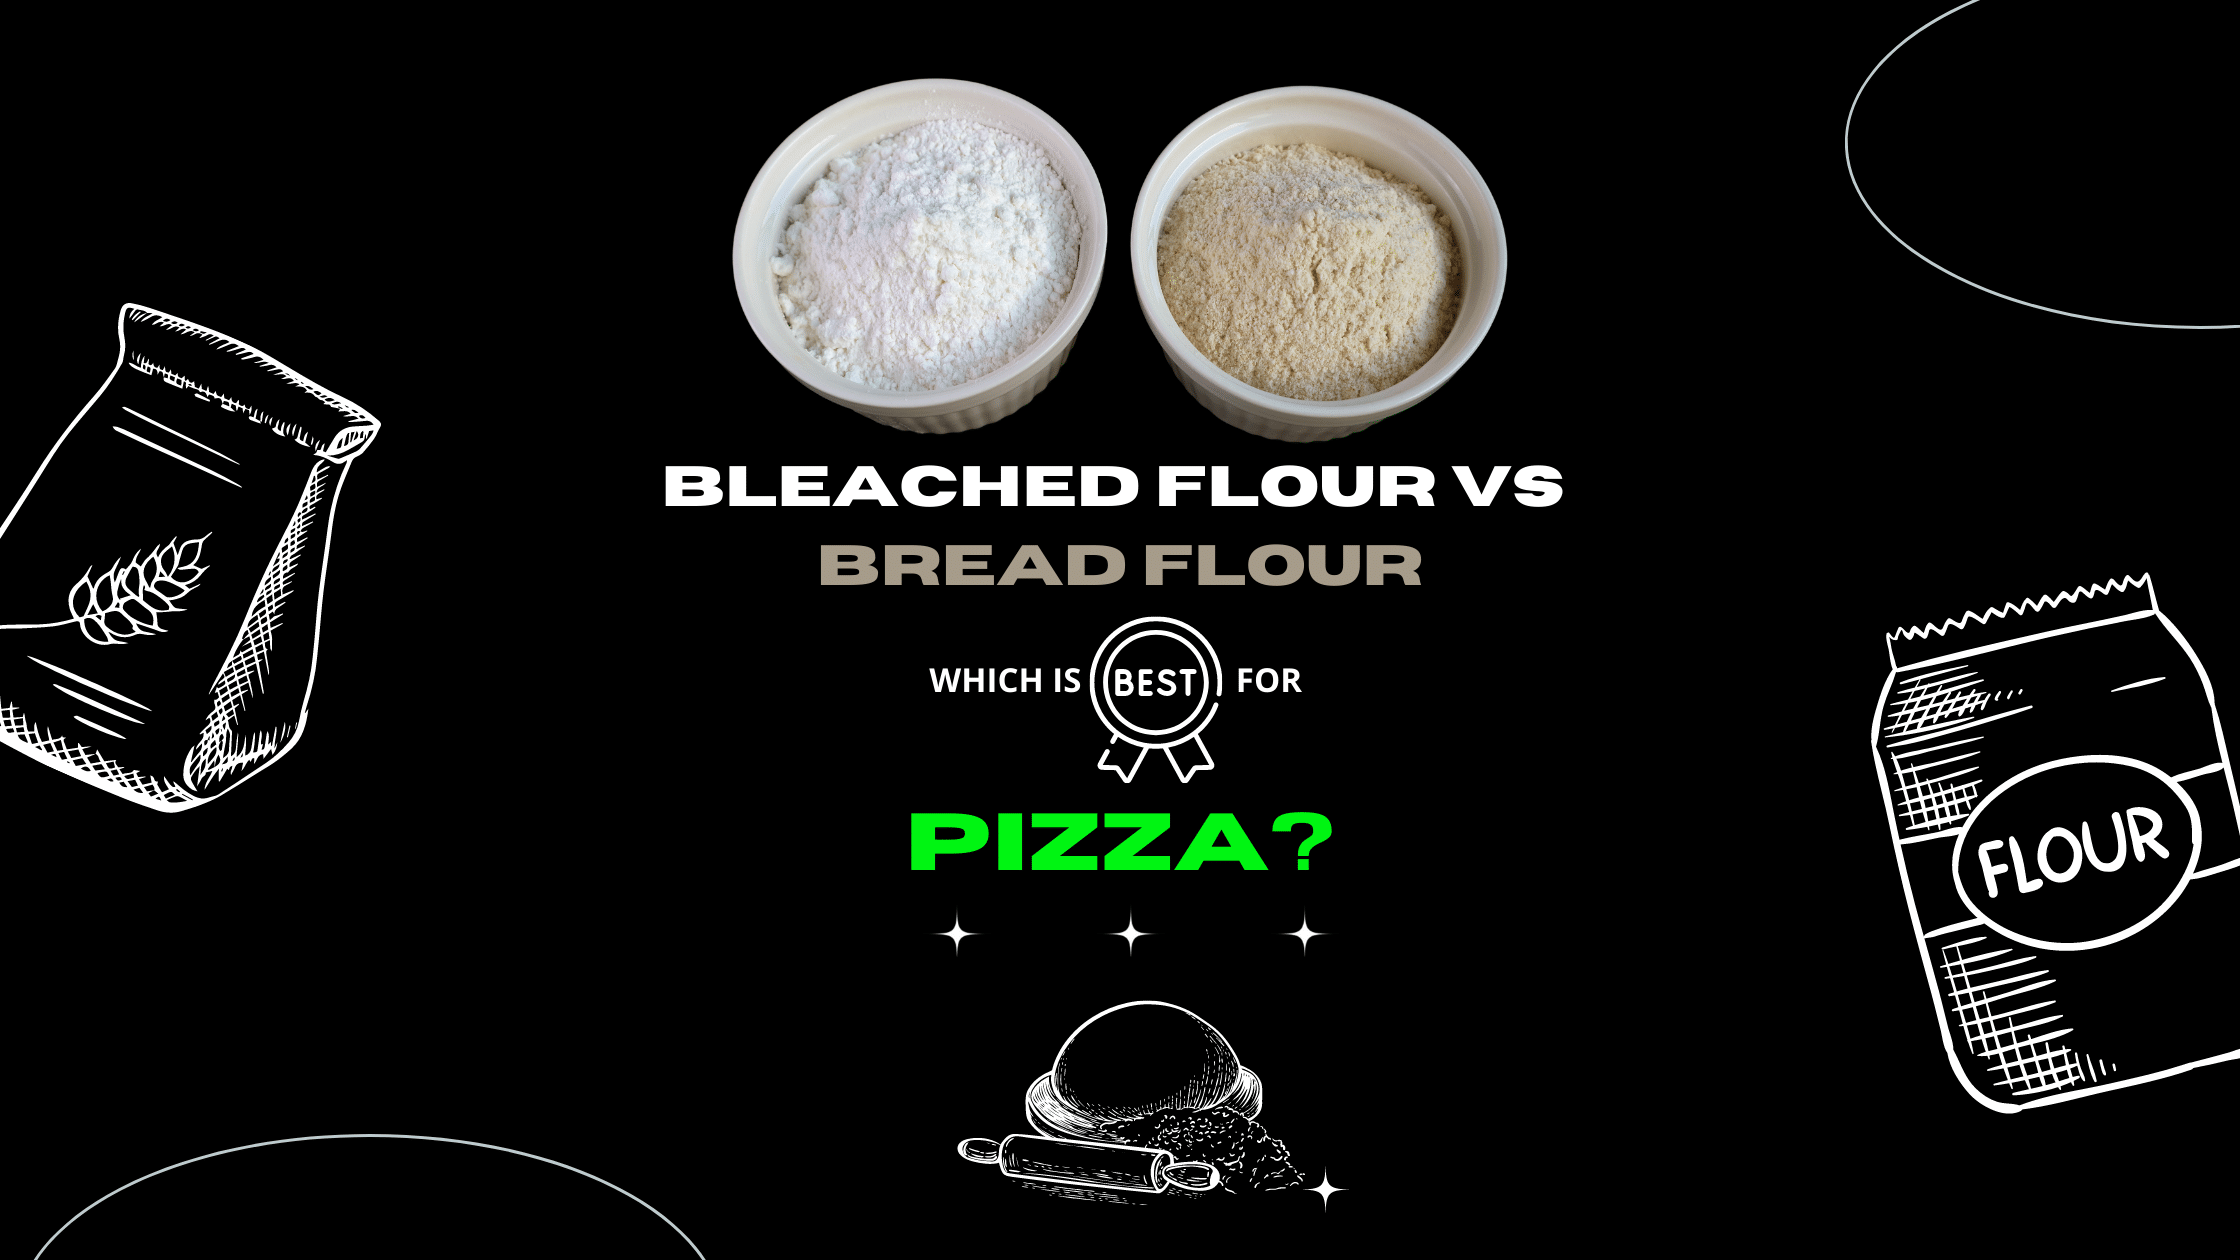 Bleached Flour vs Bread Flour:  Which is Best for Pizza?